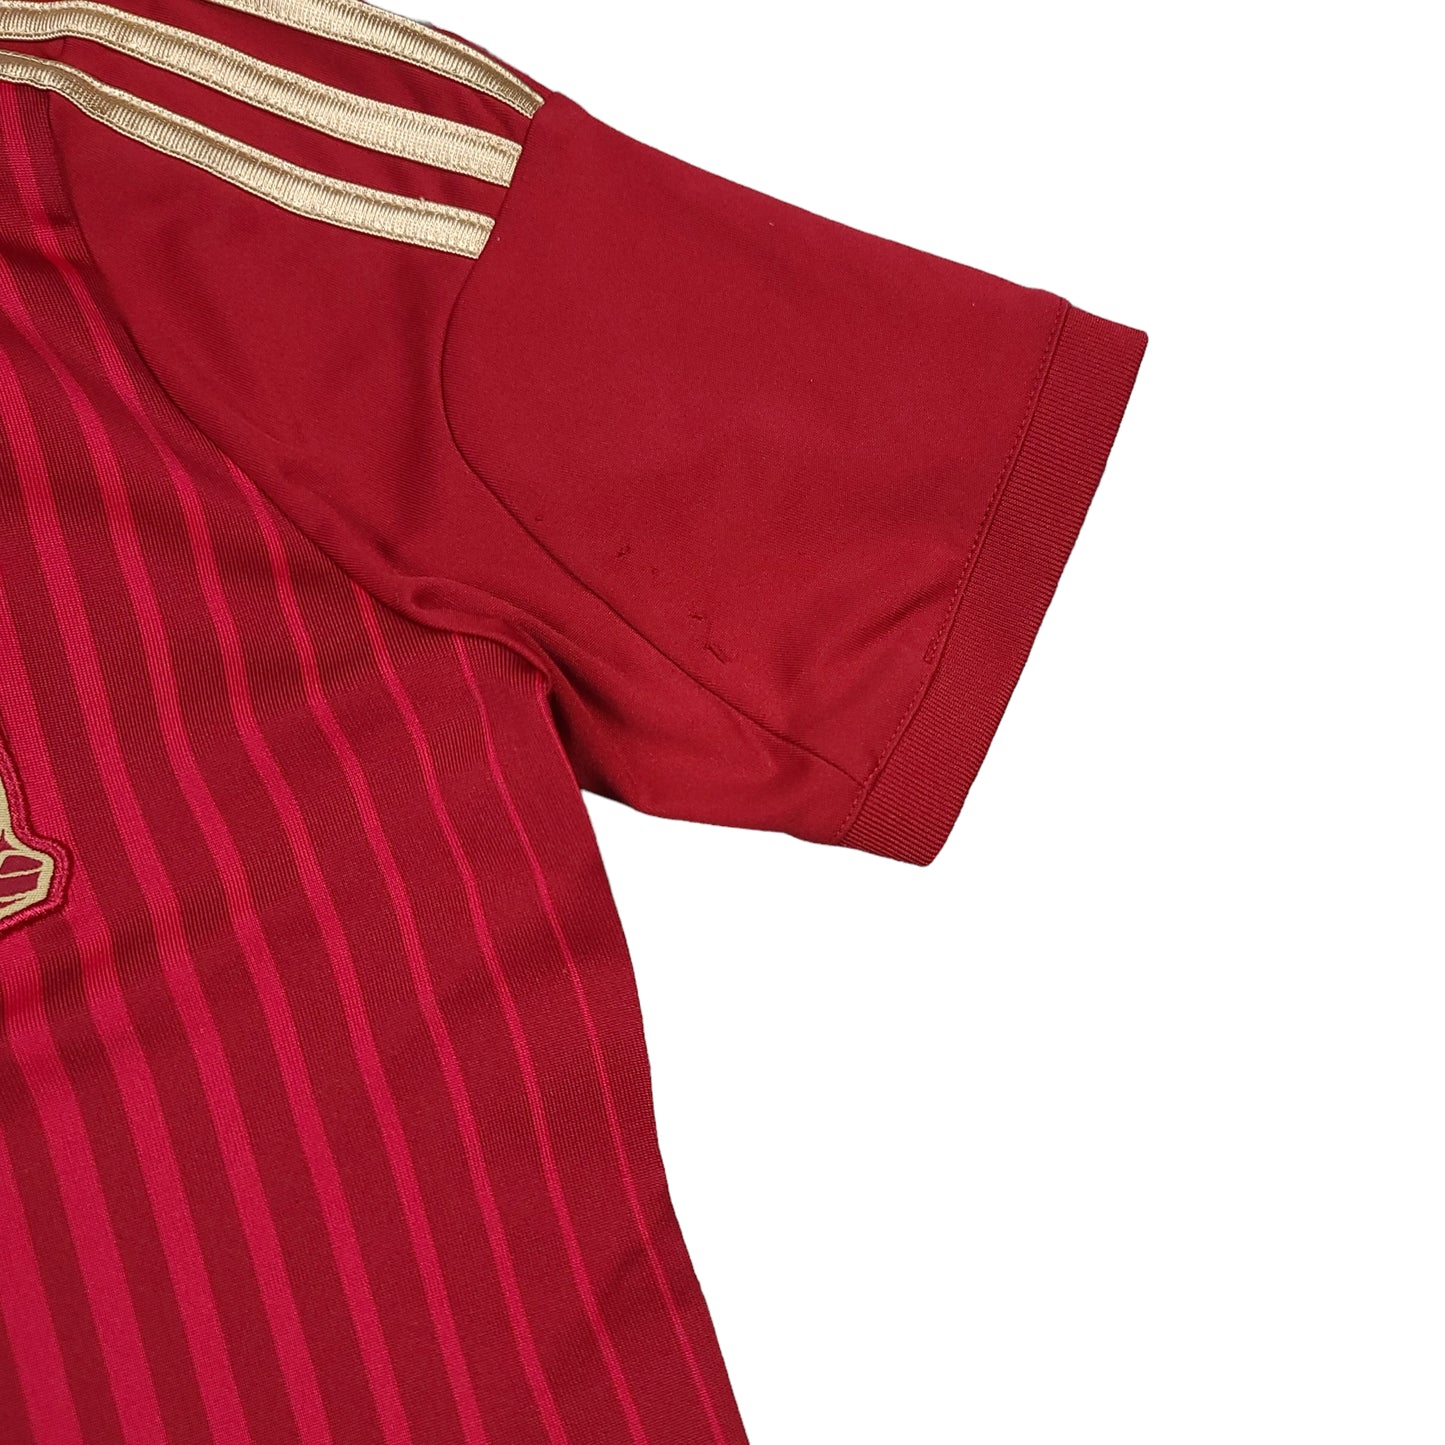 Spain 2014 adidas Youth Home Soccer Jersey